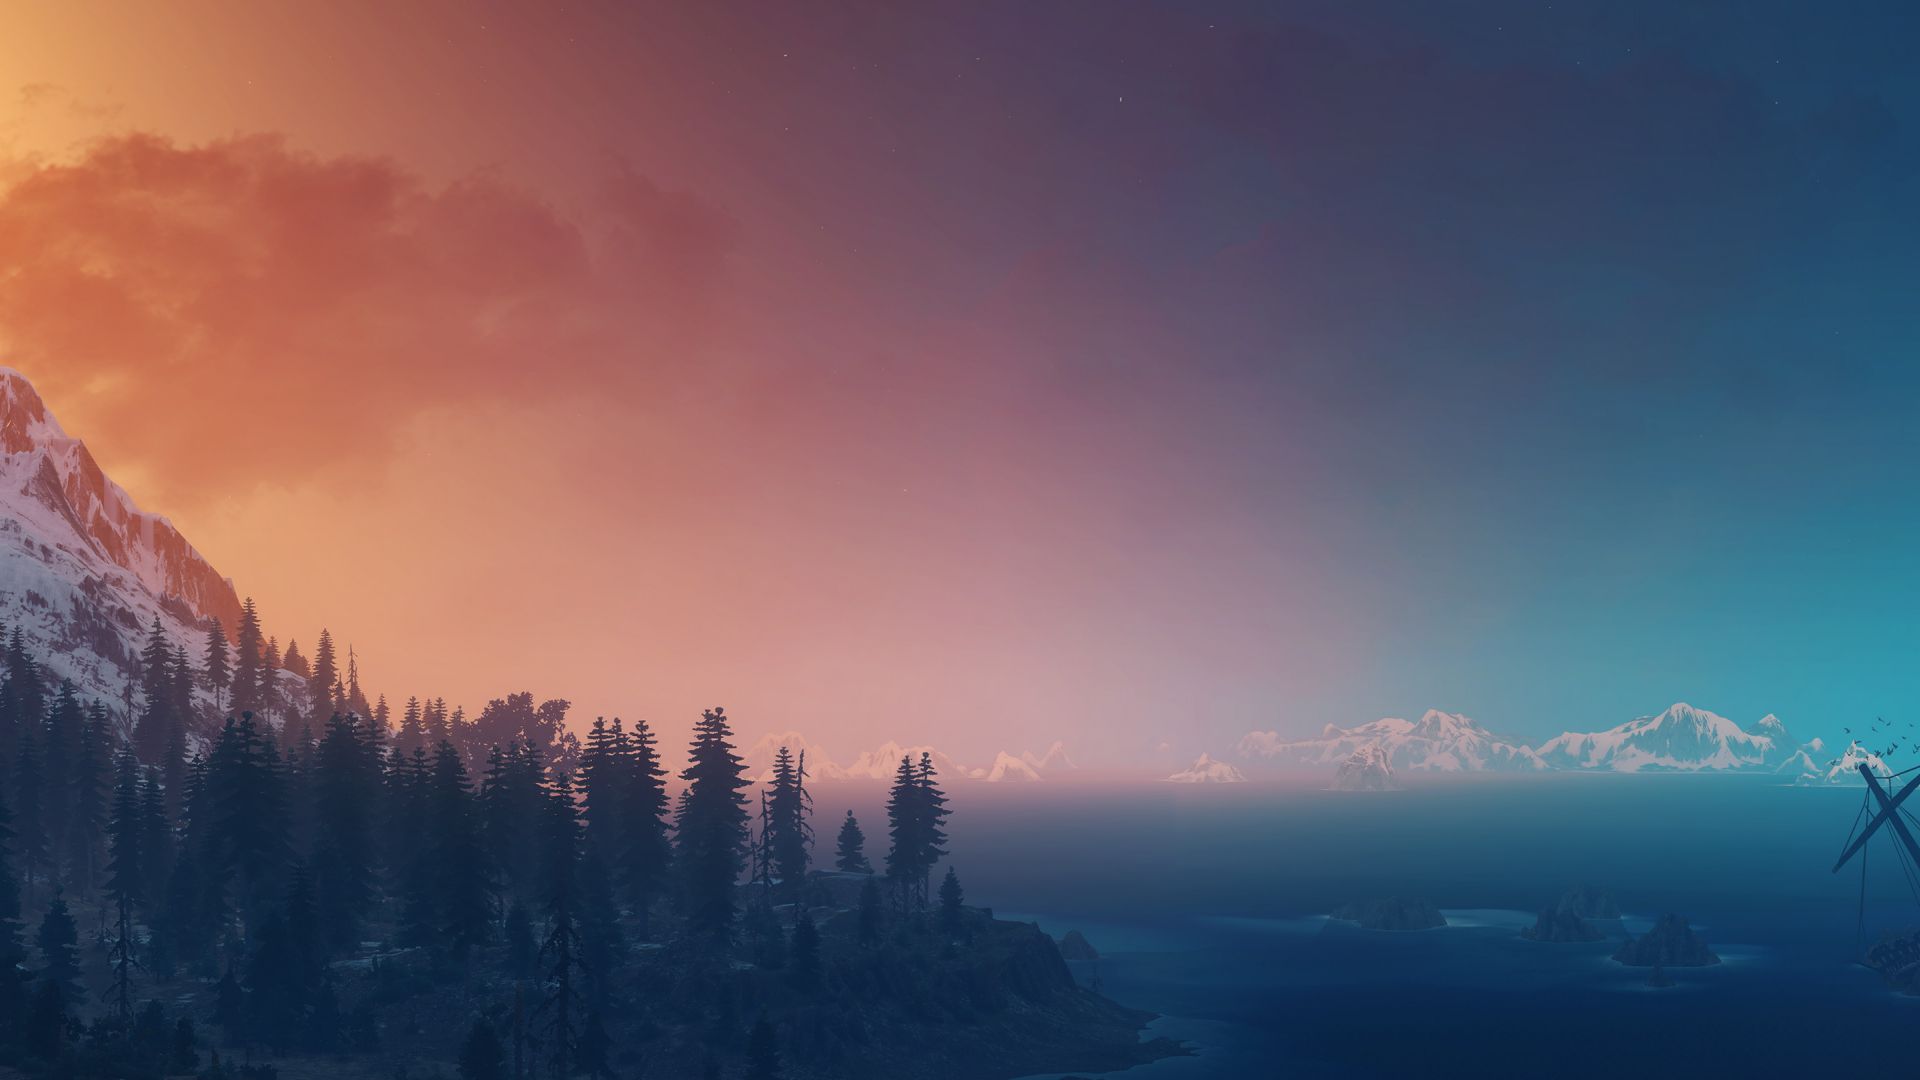 the witcher 3 wallpaper hd